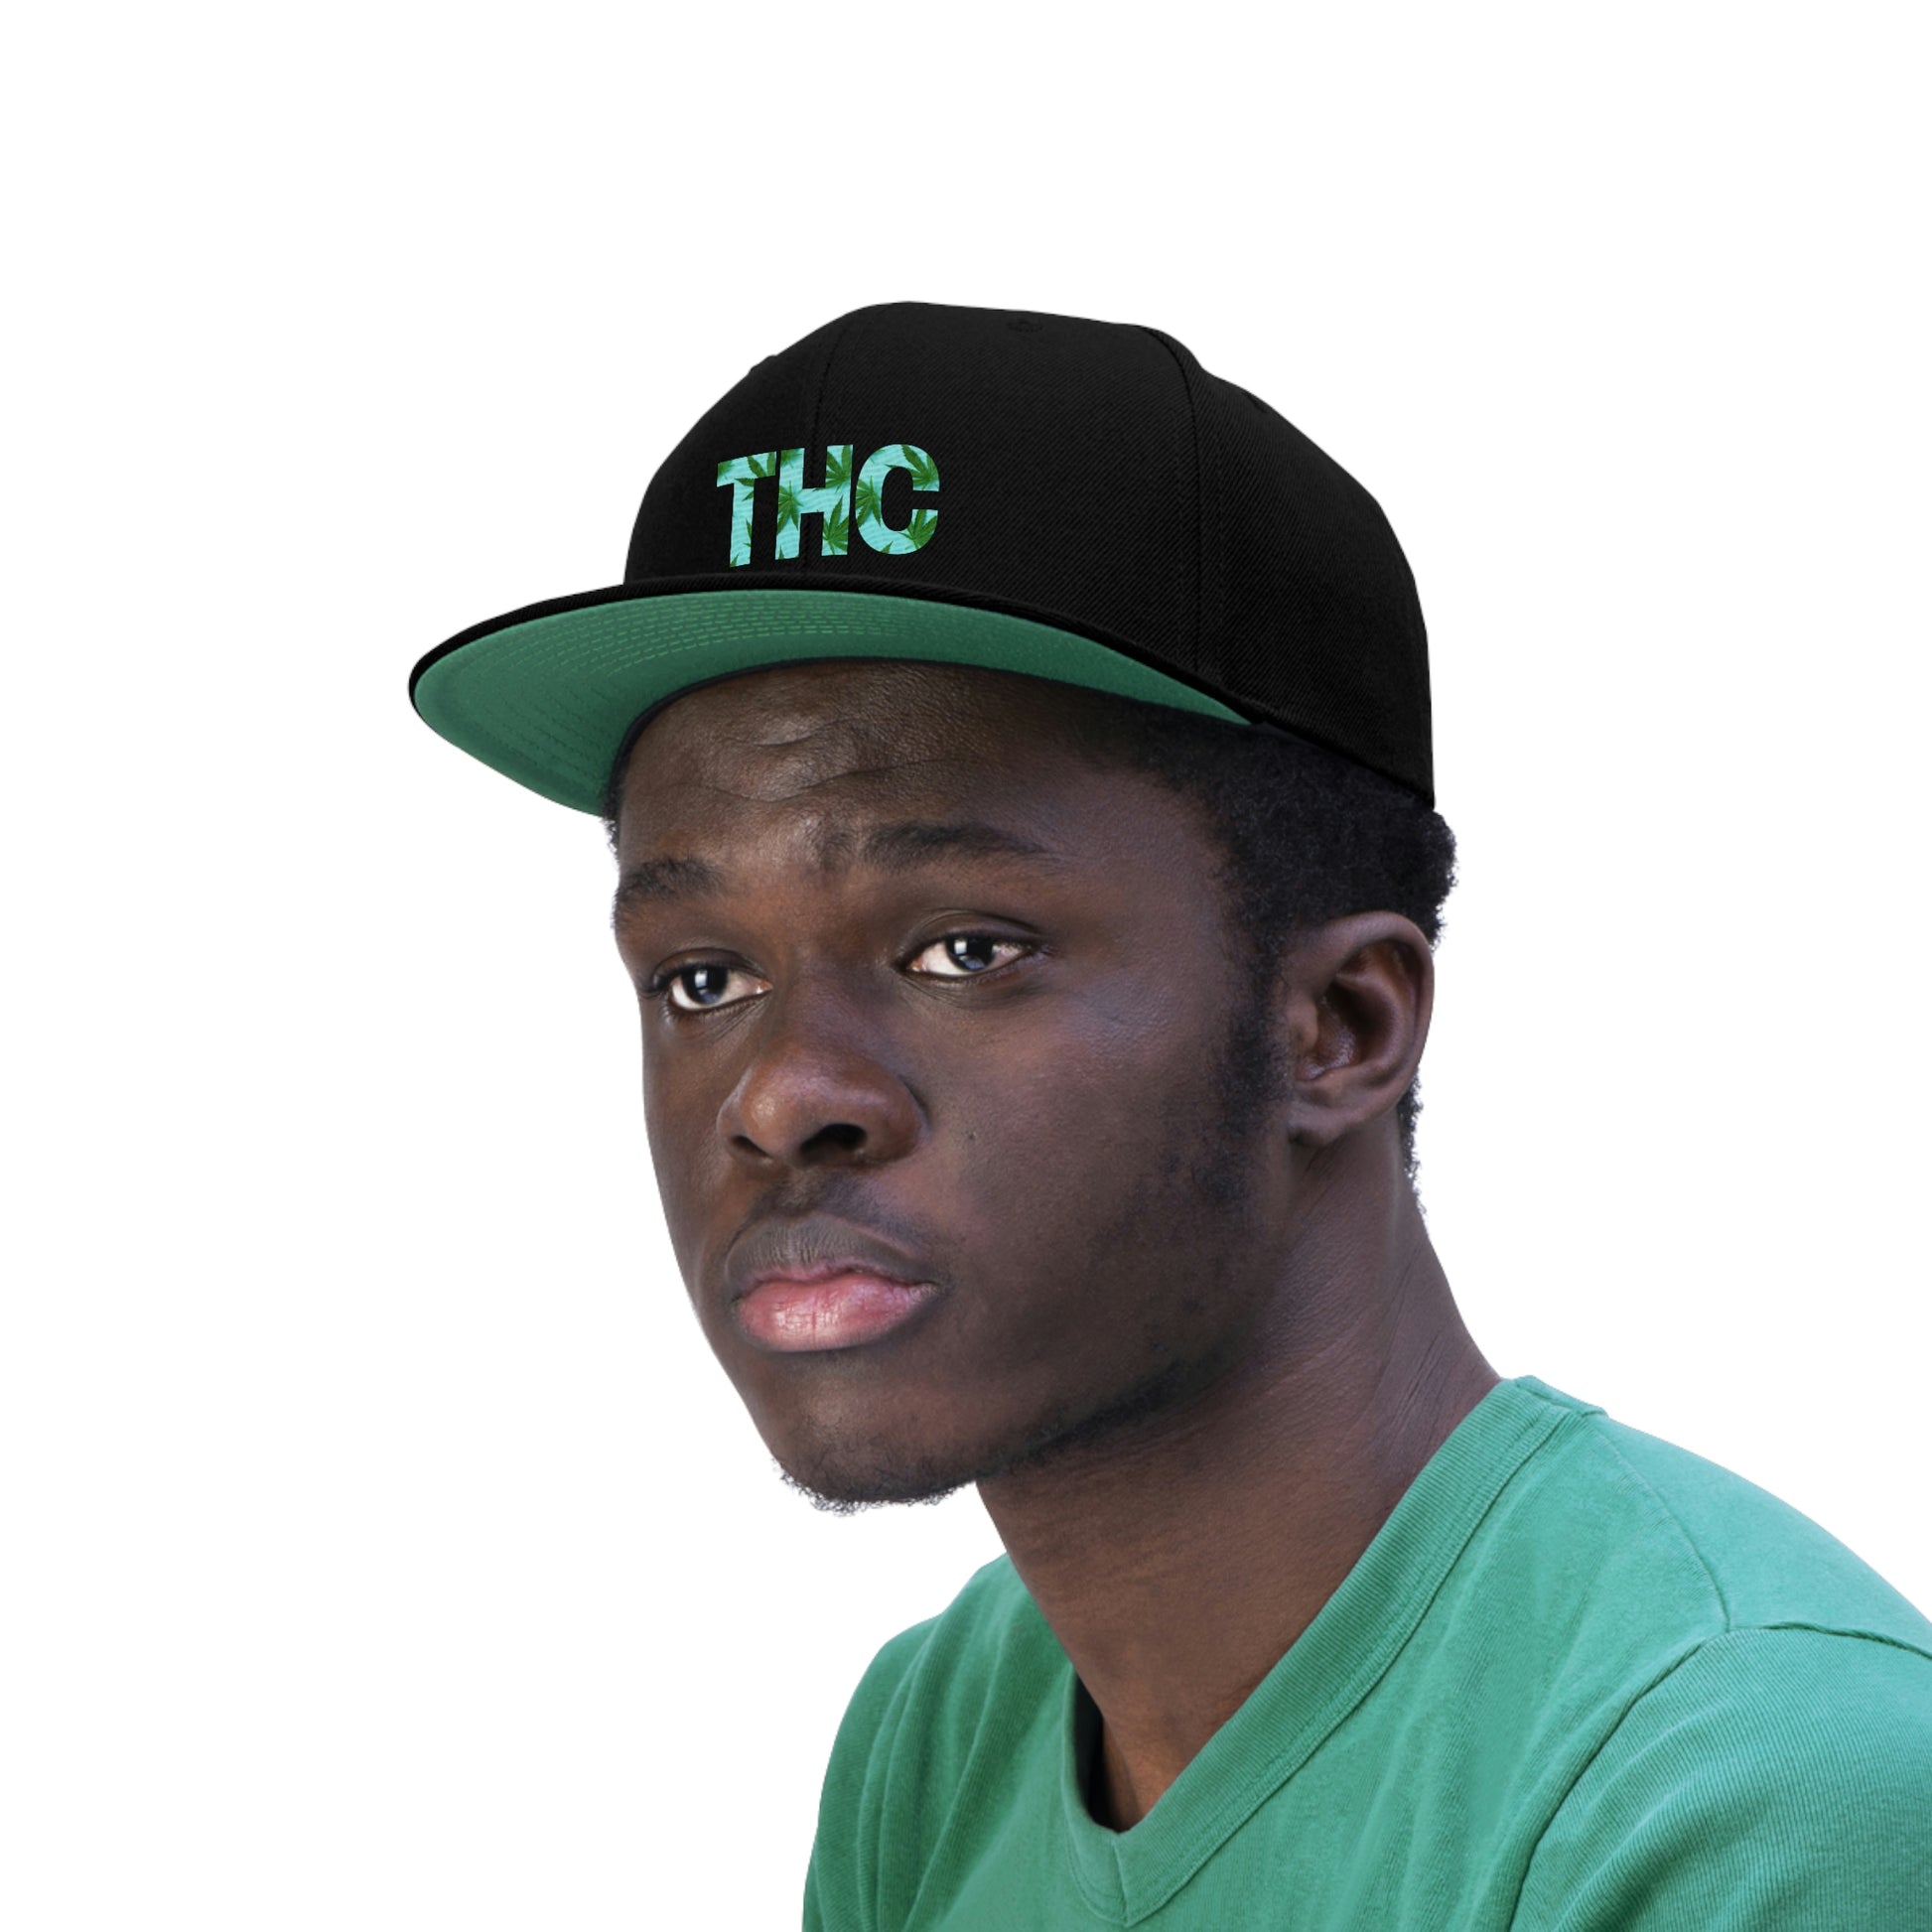 A young man sports the all black THC Snapback hat that has cannabis leaves within the letters THC with a green underbill and soft green background